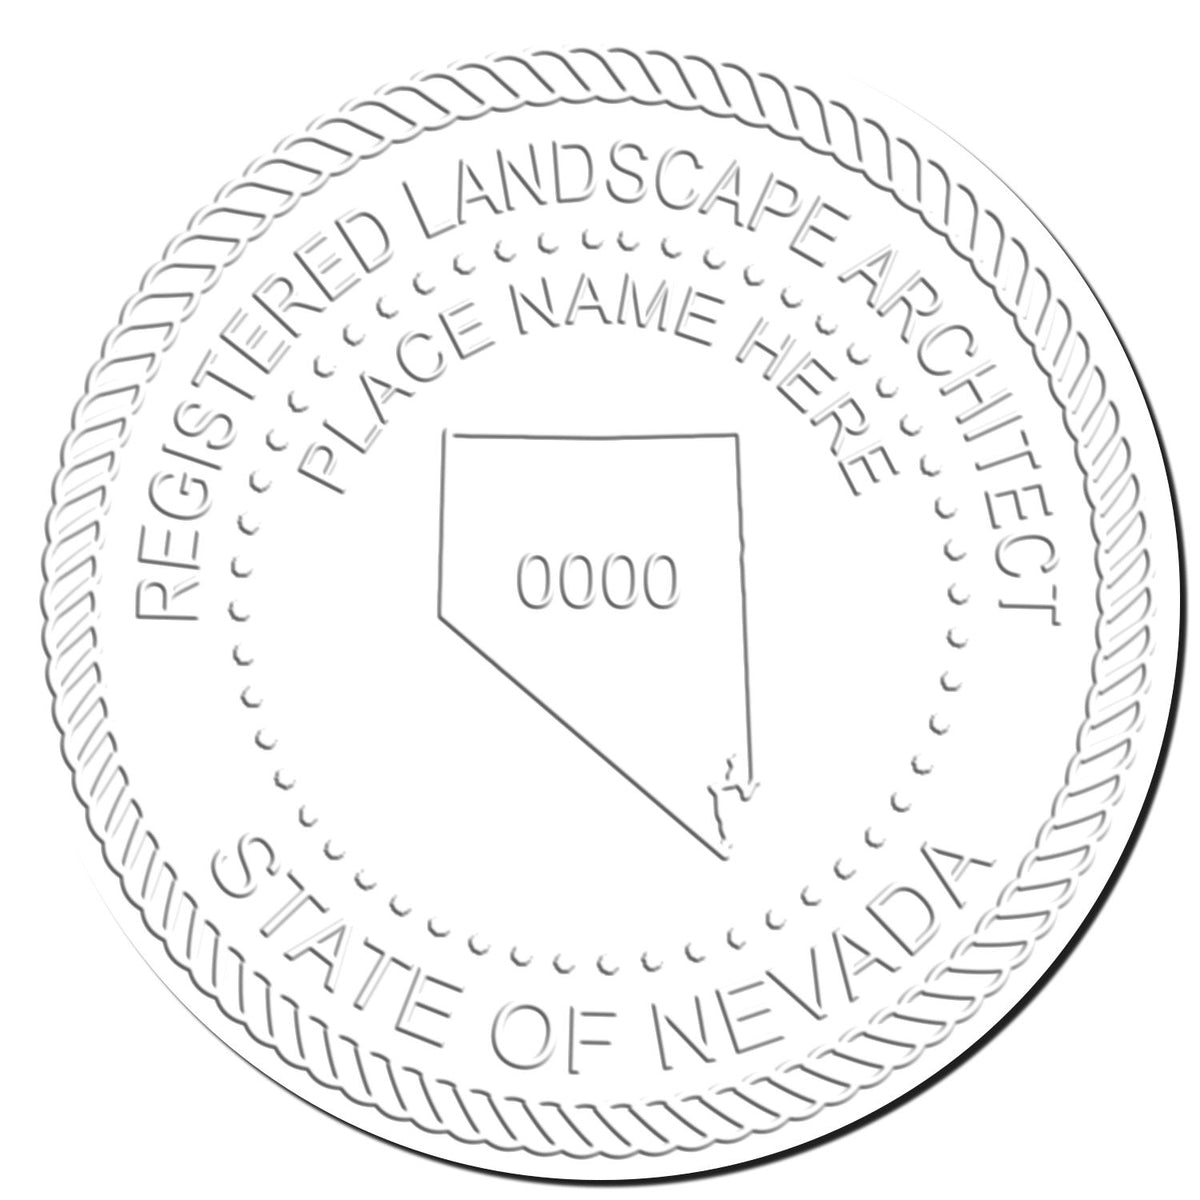 This paper is stamped with a sample imprint of the Soft Pocket Nevada Landscape Architect Embosser, signifying its quality and reliability.